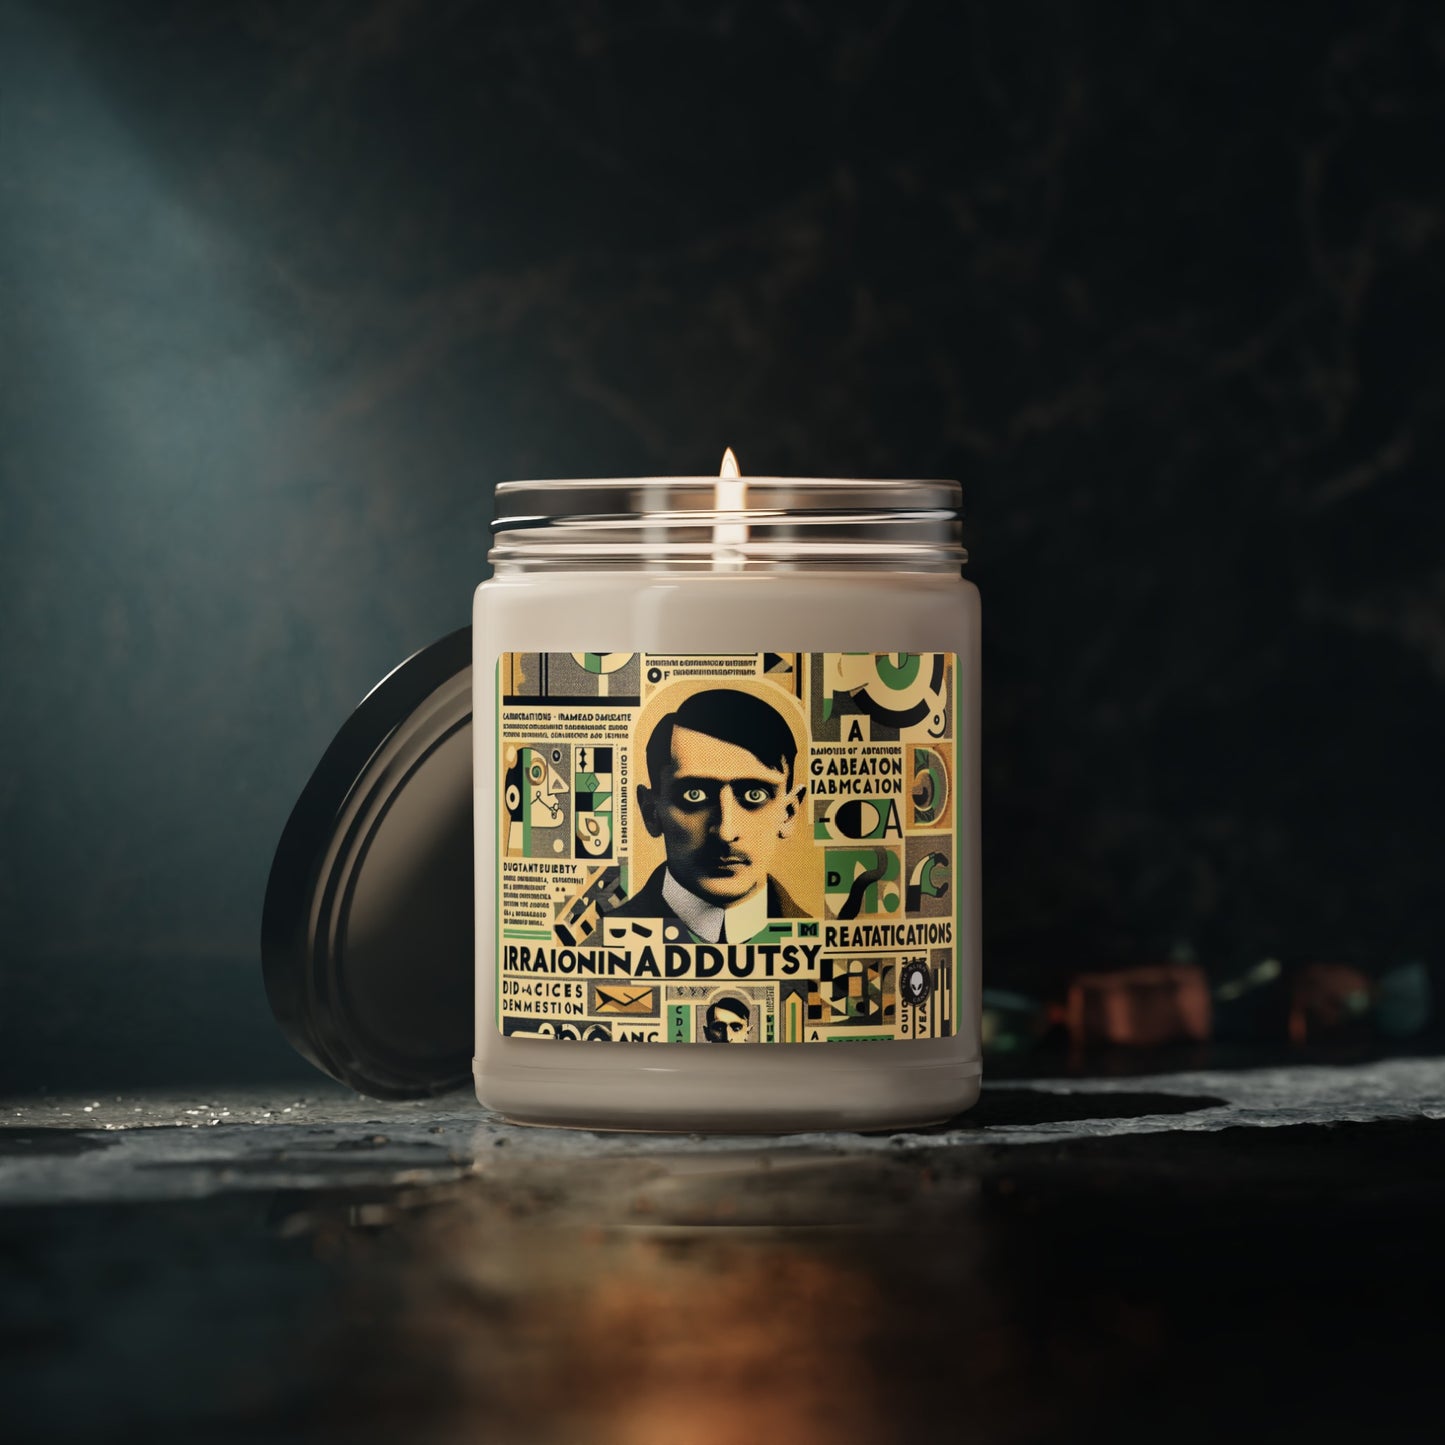 "Cacophony of Mundane Madness: A Dadaist Collage" - The Alien Scented Soy Candle 9oz Dadaism